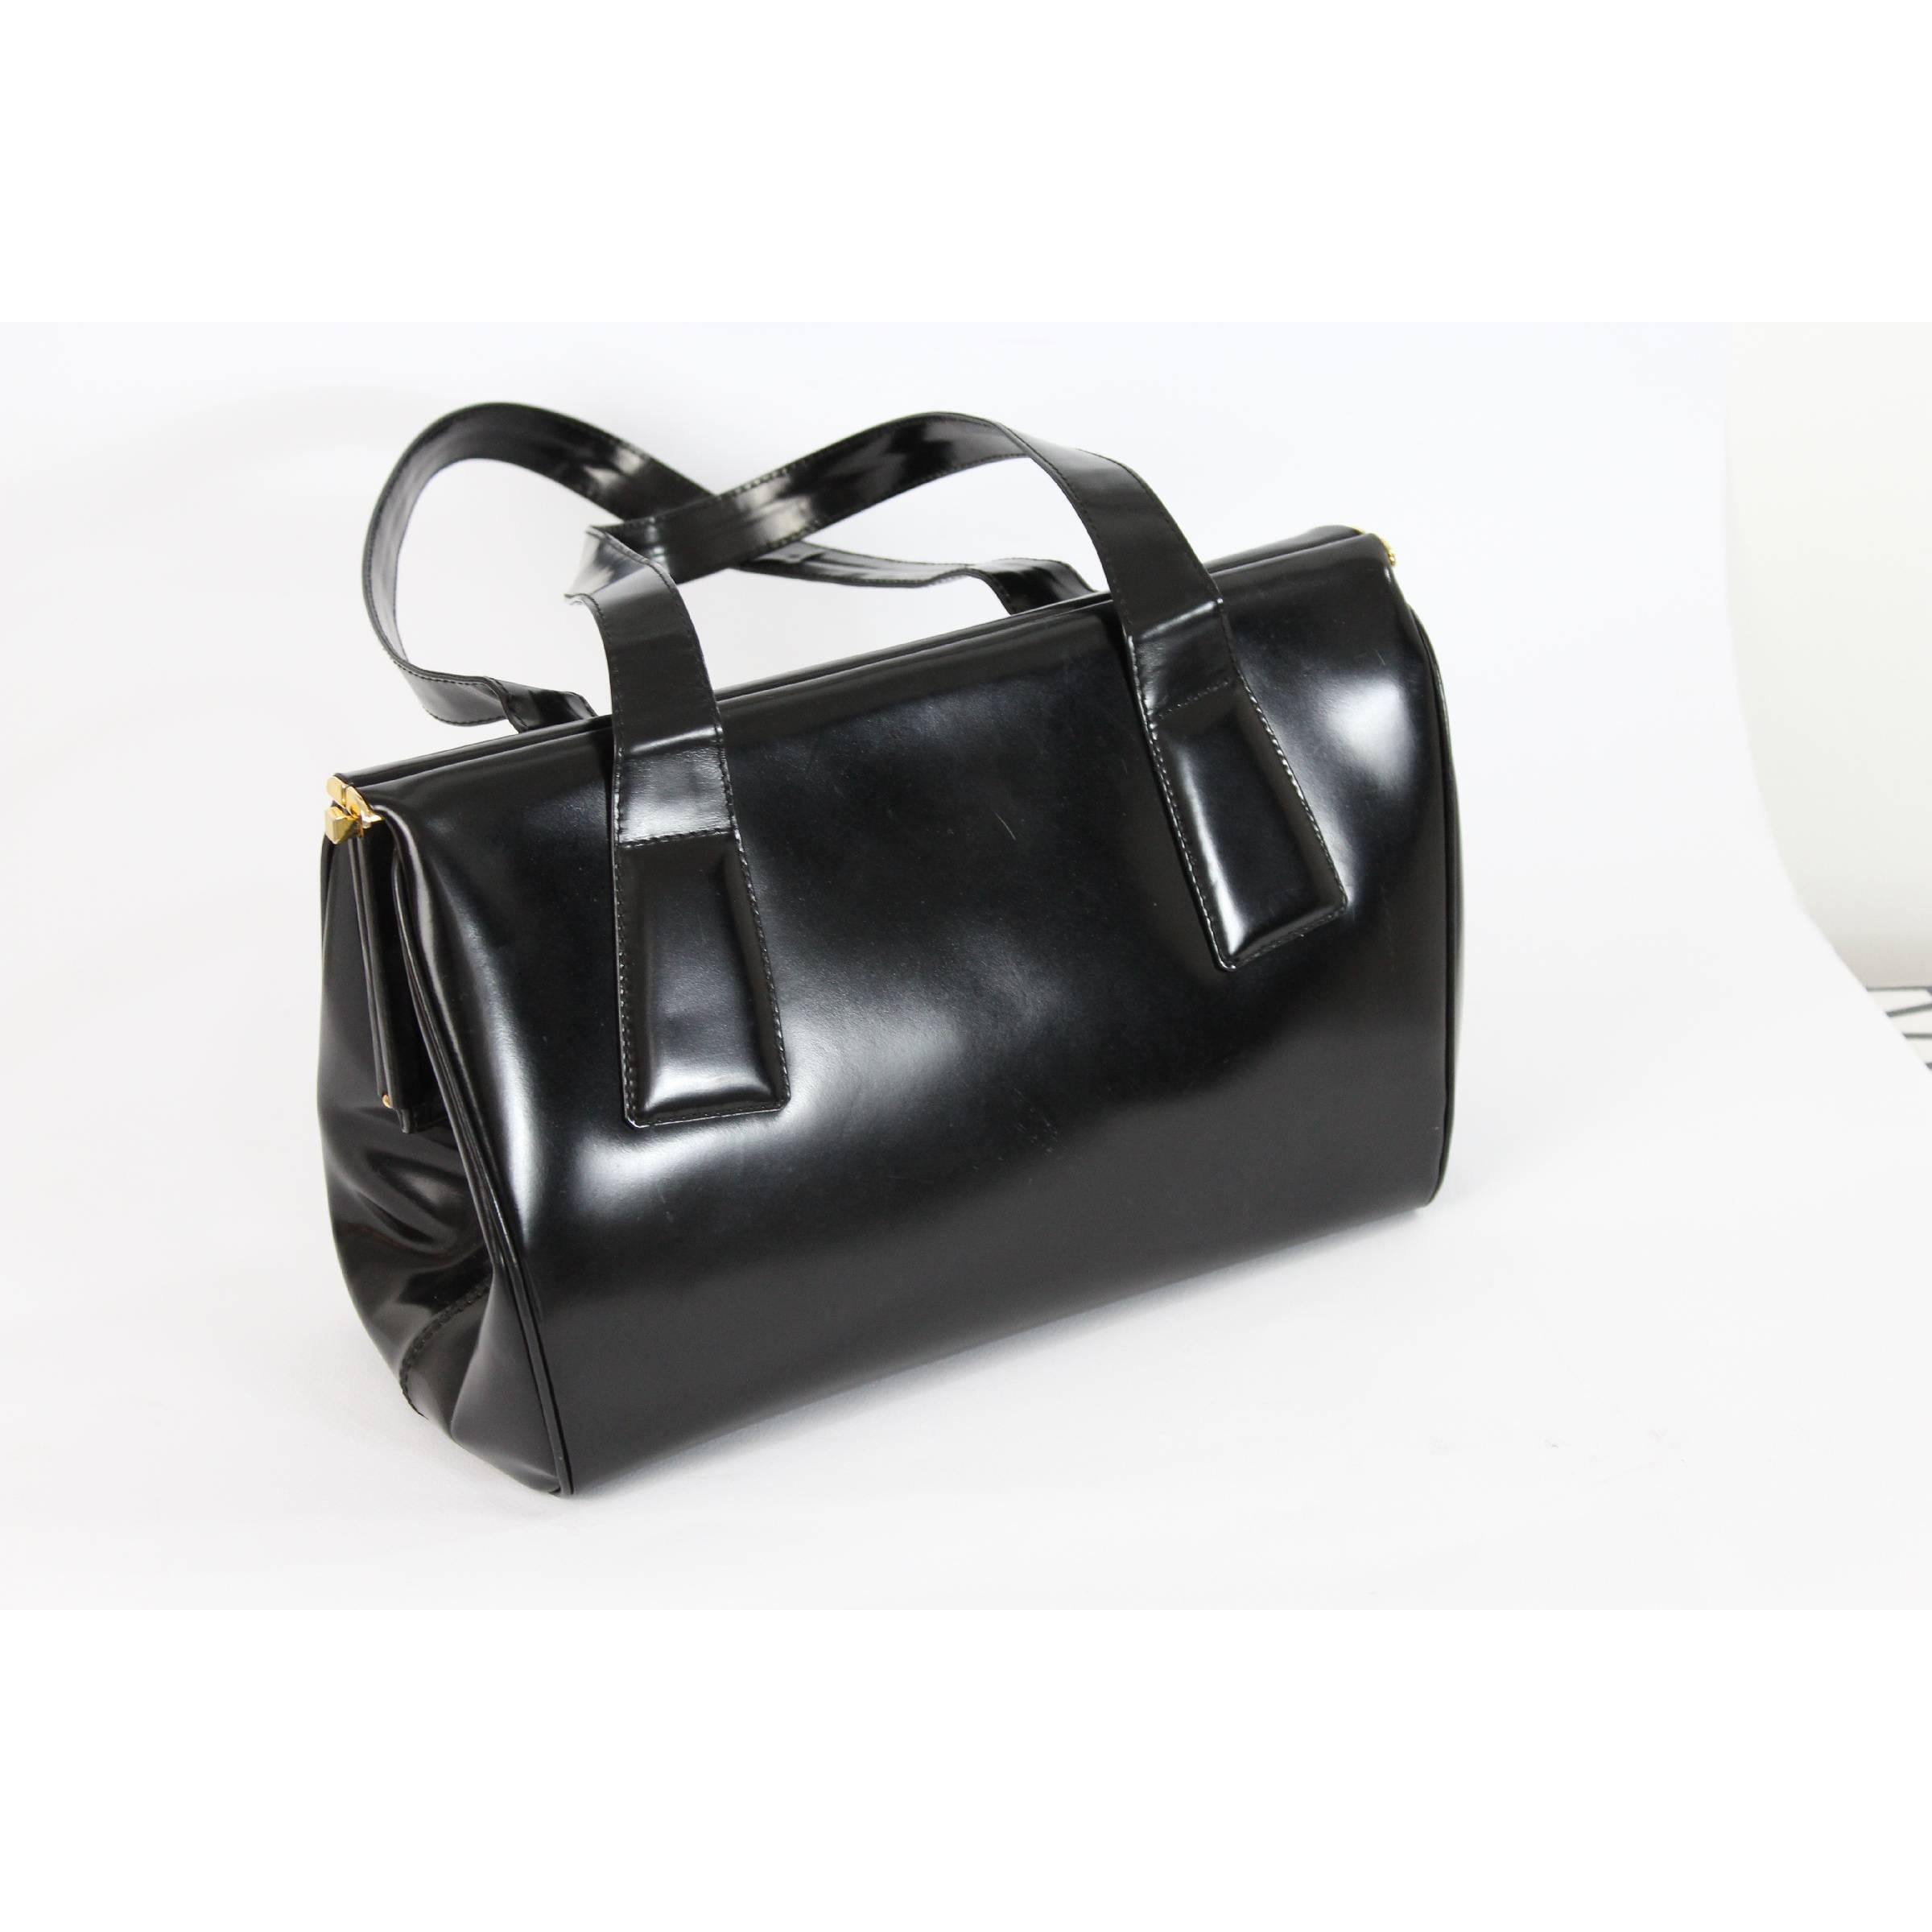 Prada Doctor Bag Black Patent Leather Vintage In Excellent Condition For Sale In Brindisi, IT